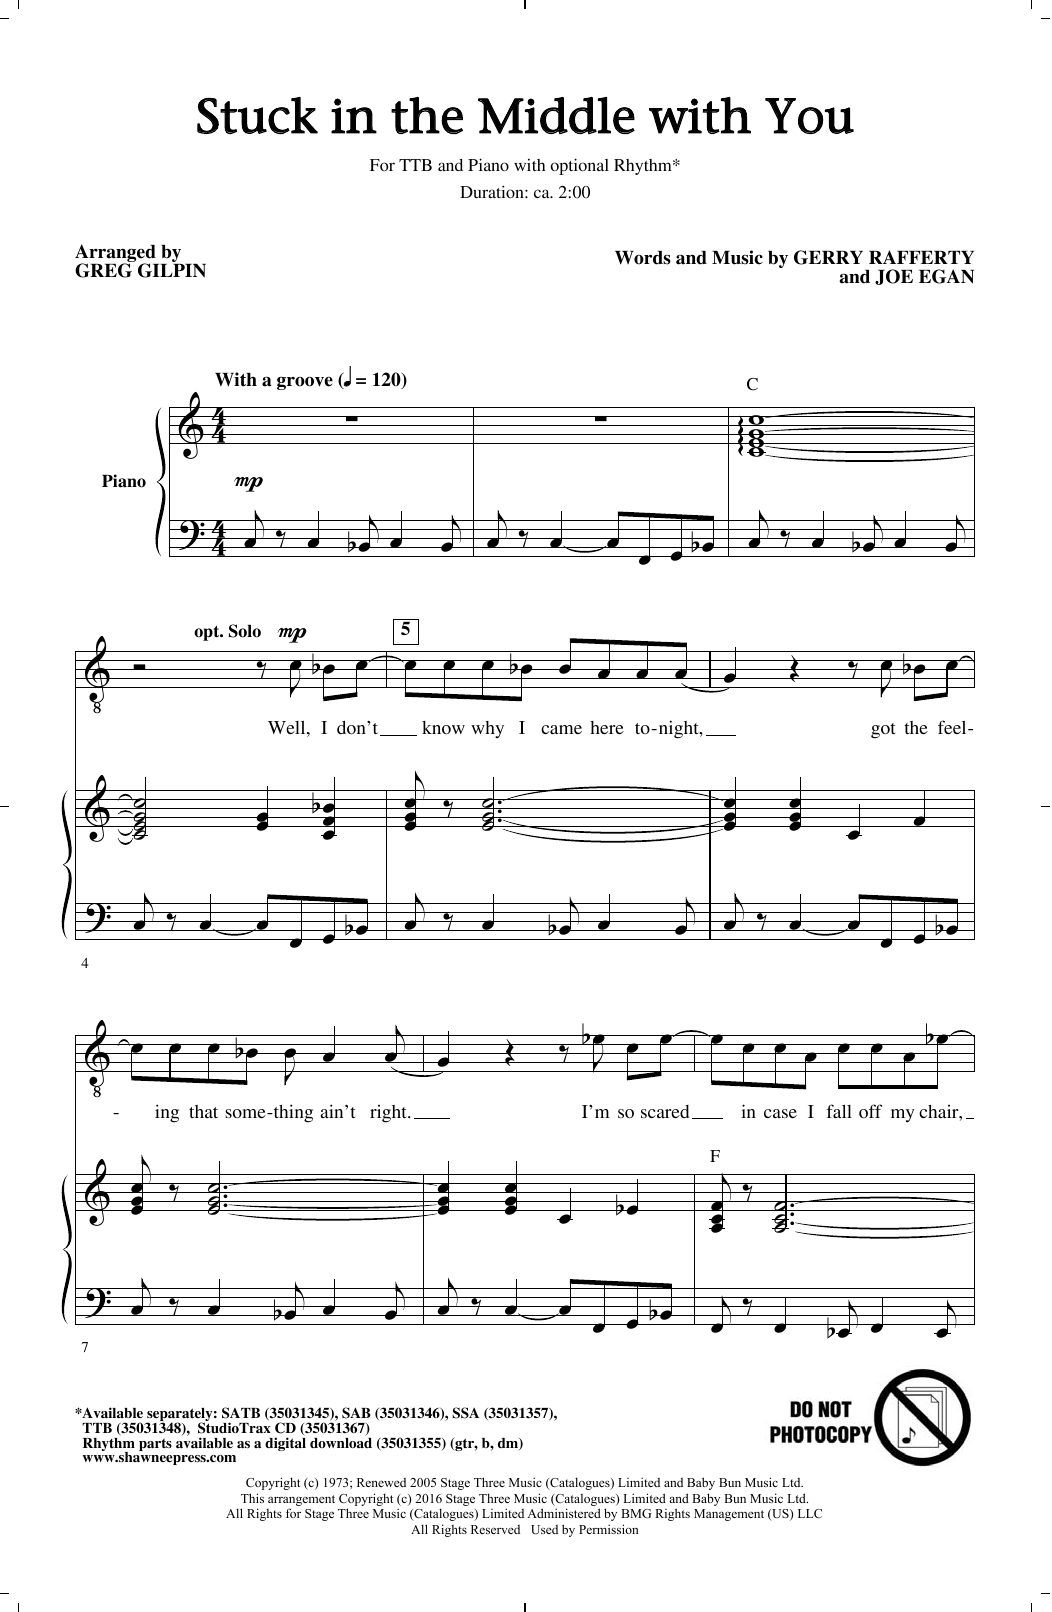 Download Greg Gilpin Stuck In The Middle With You Sheet Music